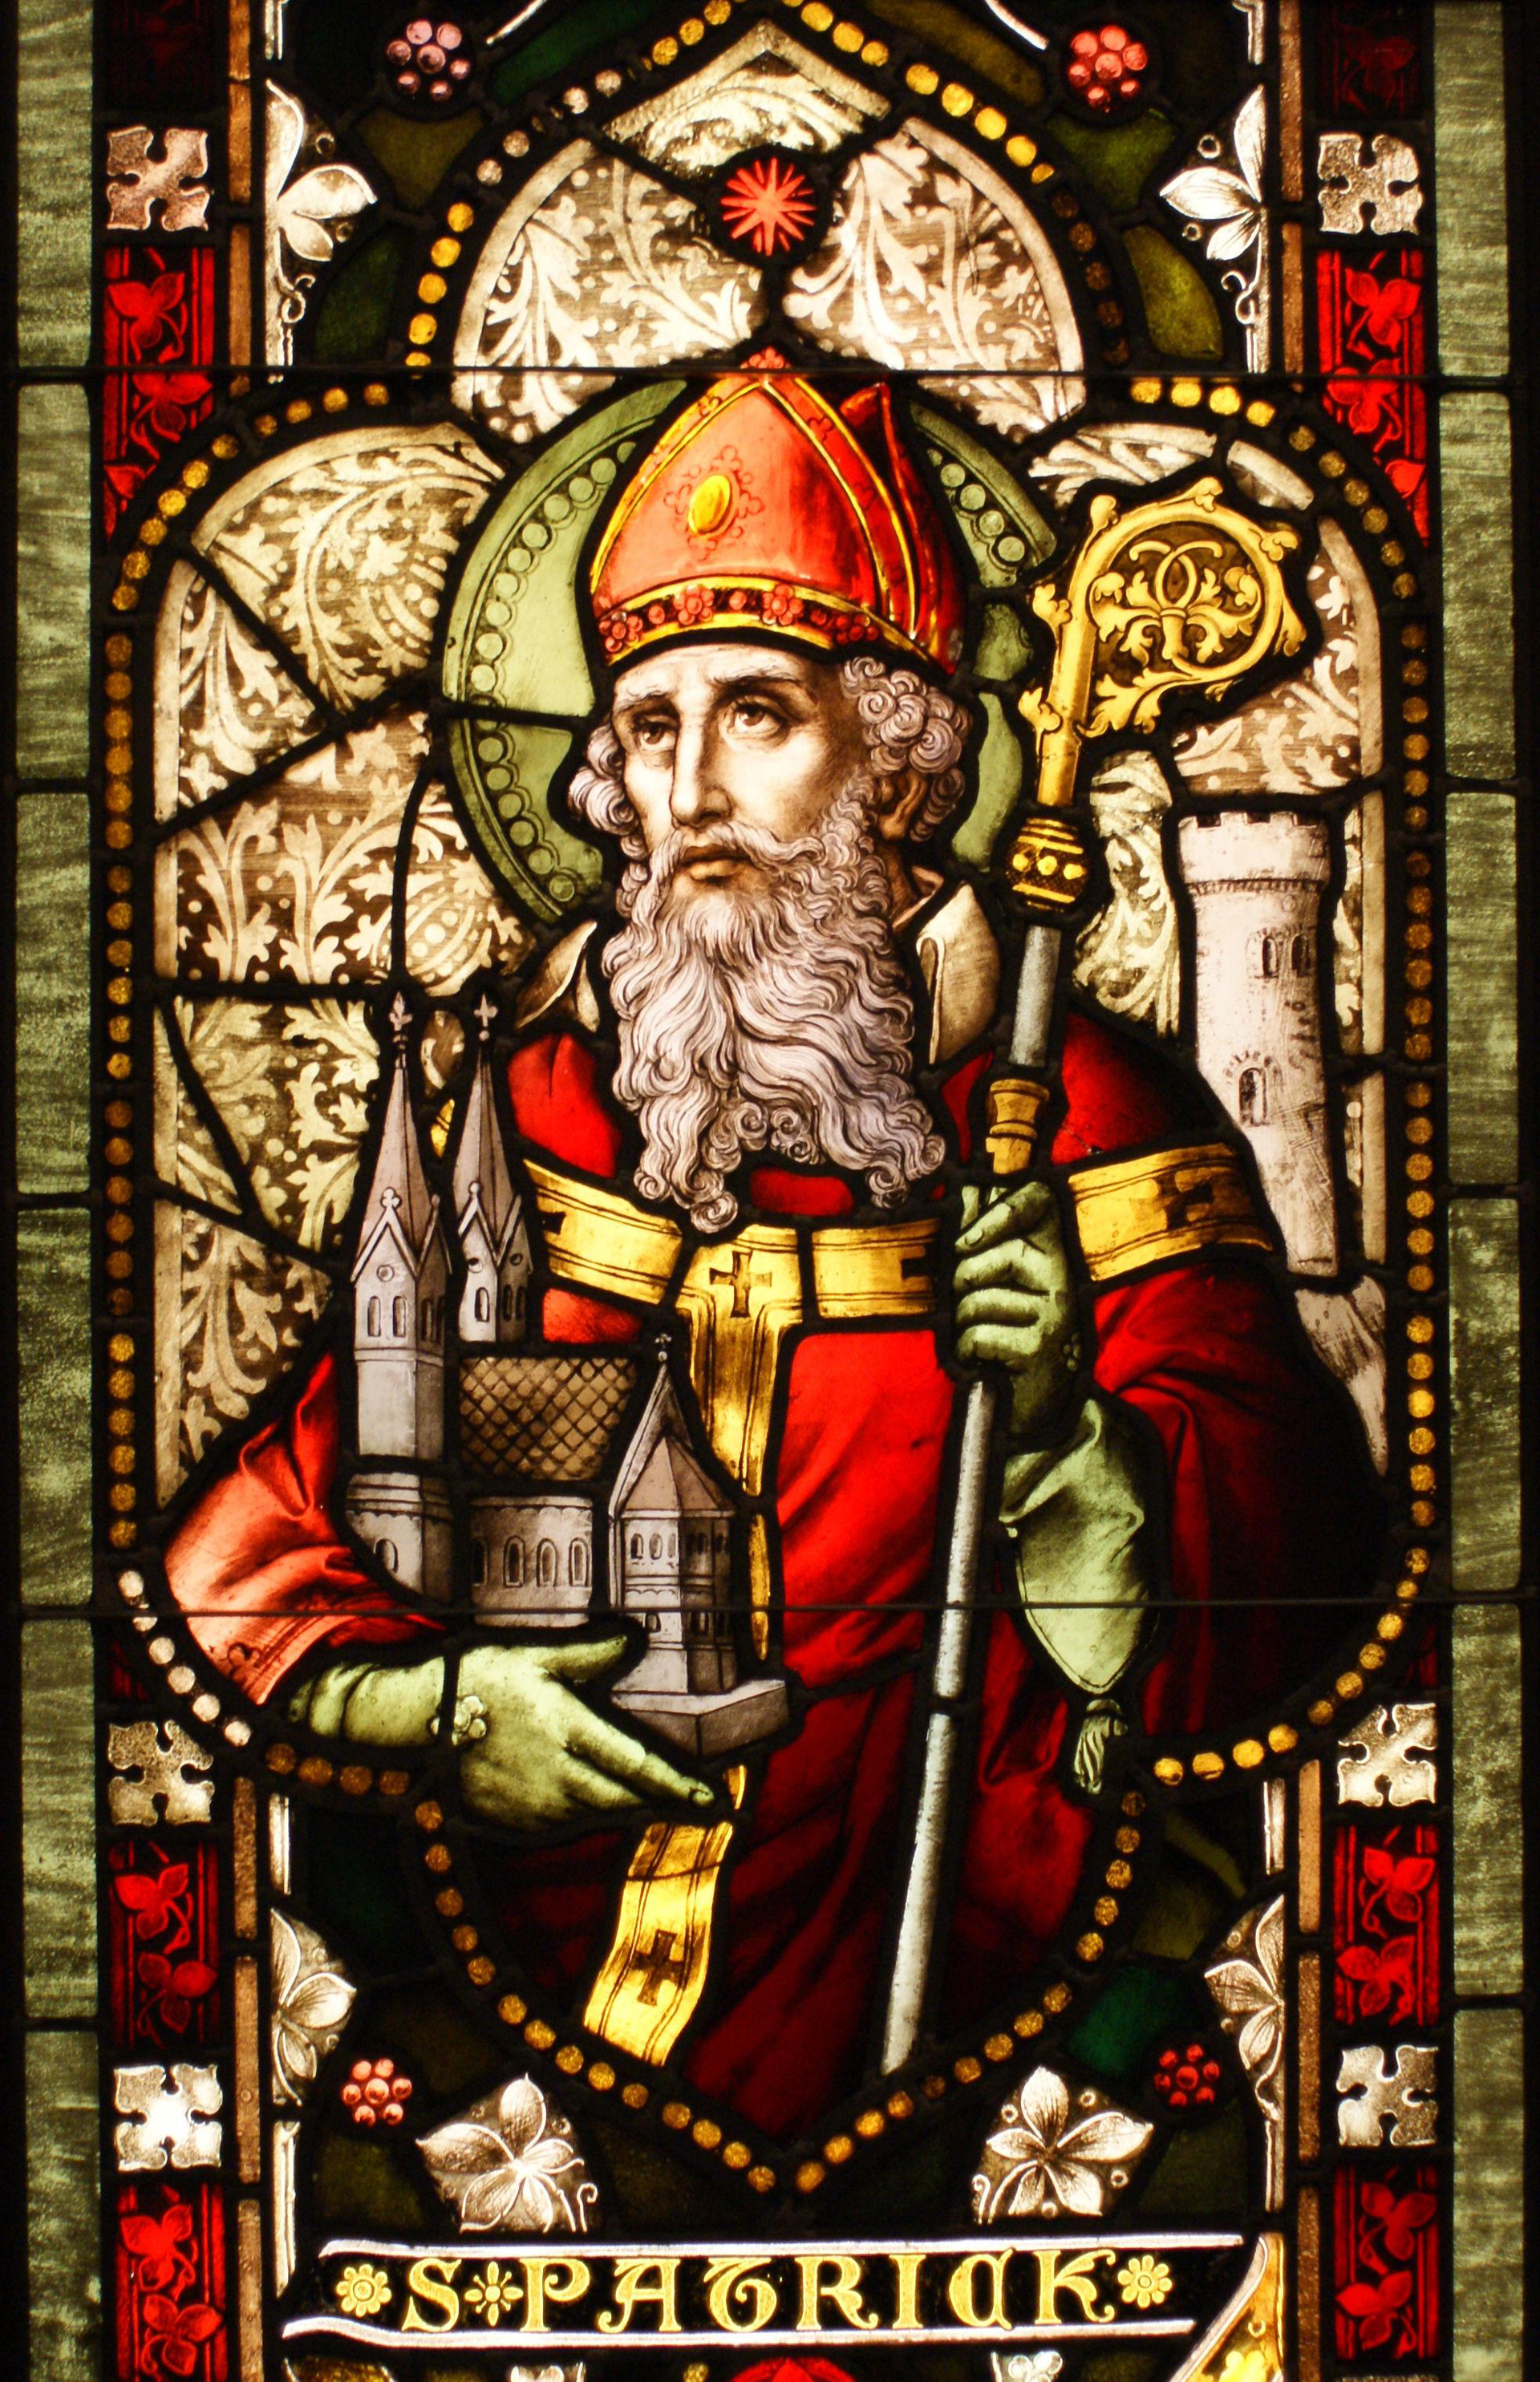 Stained glass image of St. Patrick